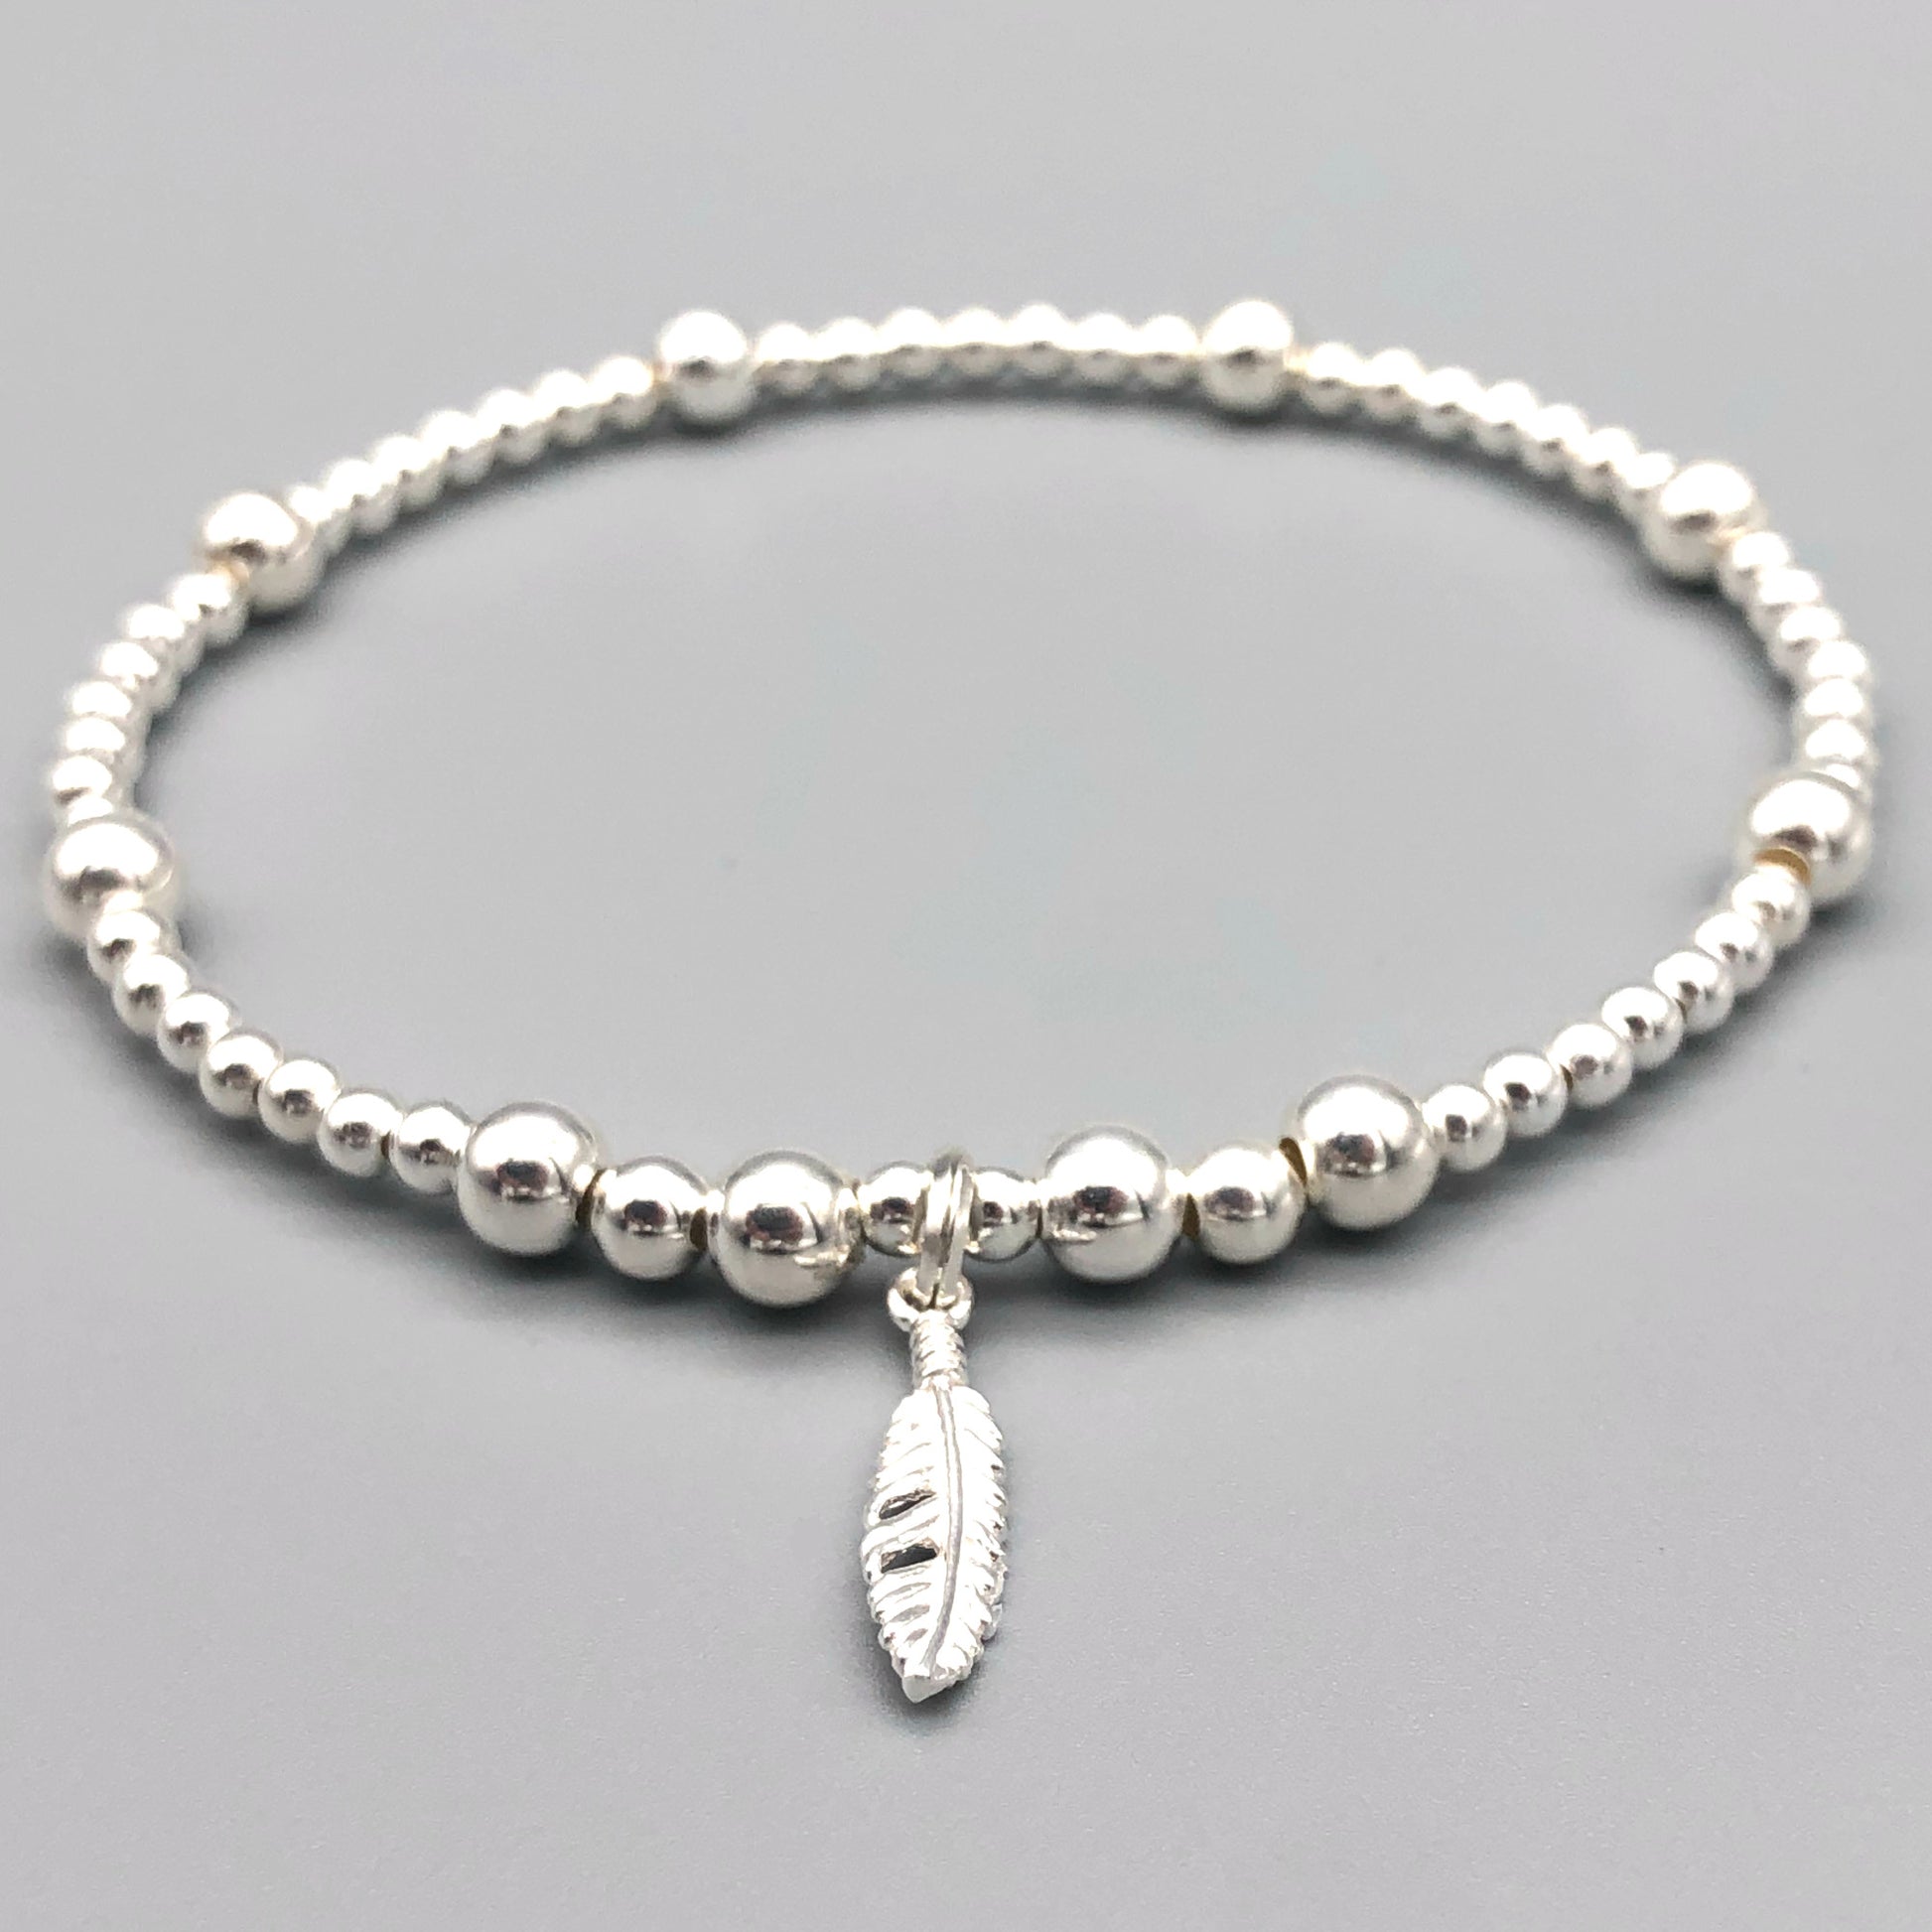 Feather charm sterling silver stacking charm bracelet by My Silver Wish